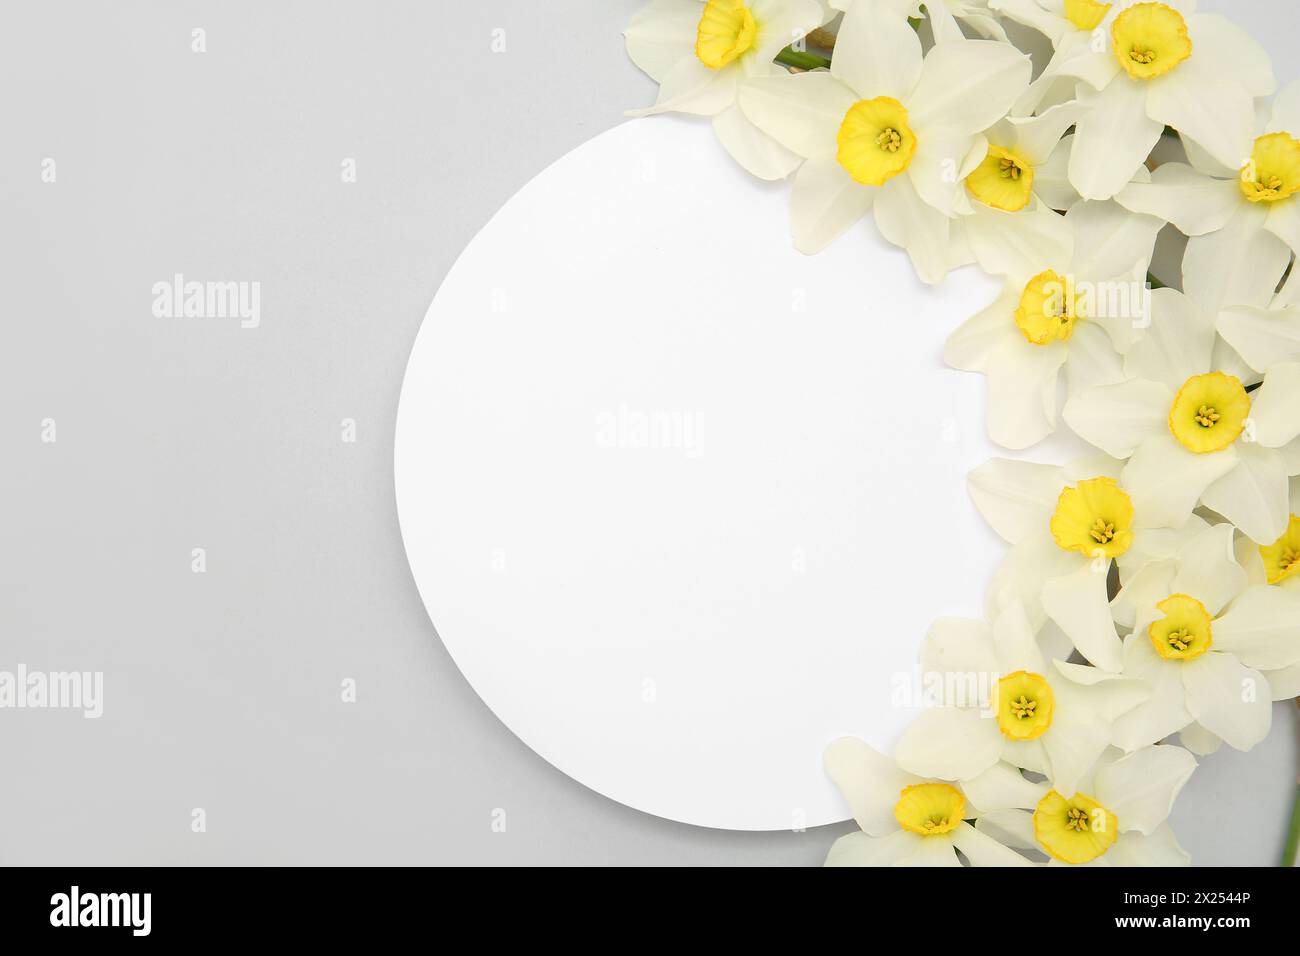 Composition with daffodil flowers and blank card on grey background. Top view Stock Photo